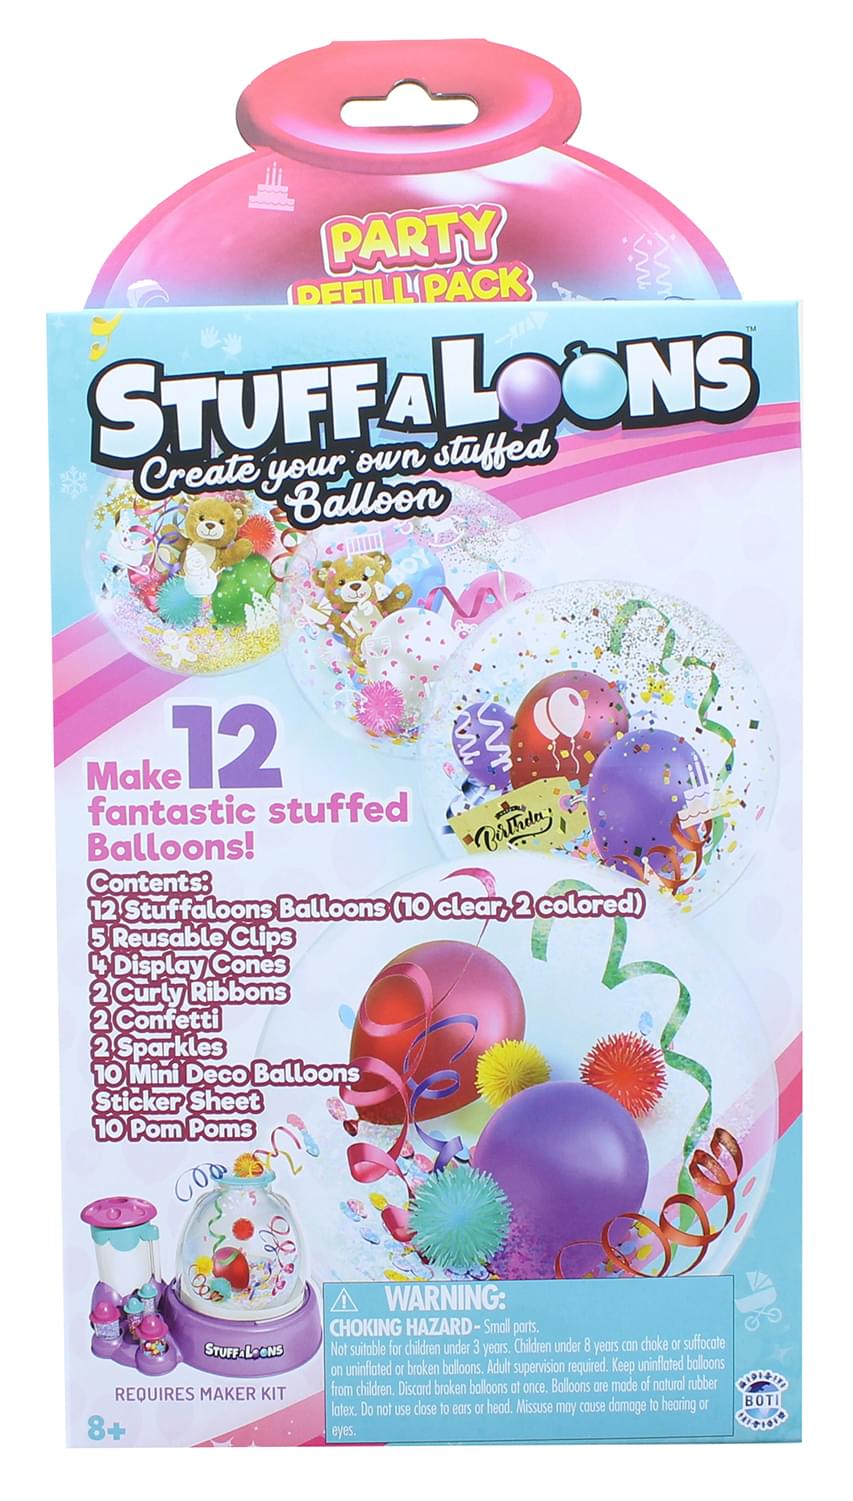 Stuffaloons Party Refill Pack | 12 Balooons + Assorted Decorations